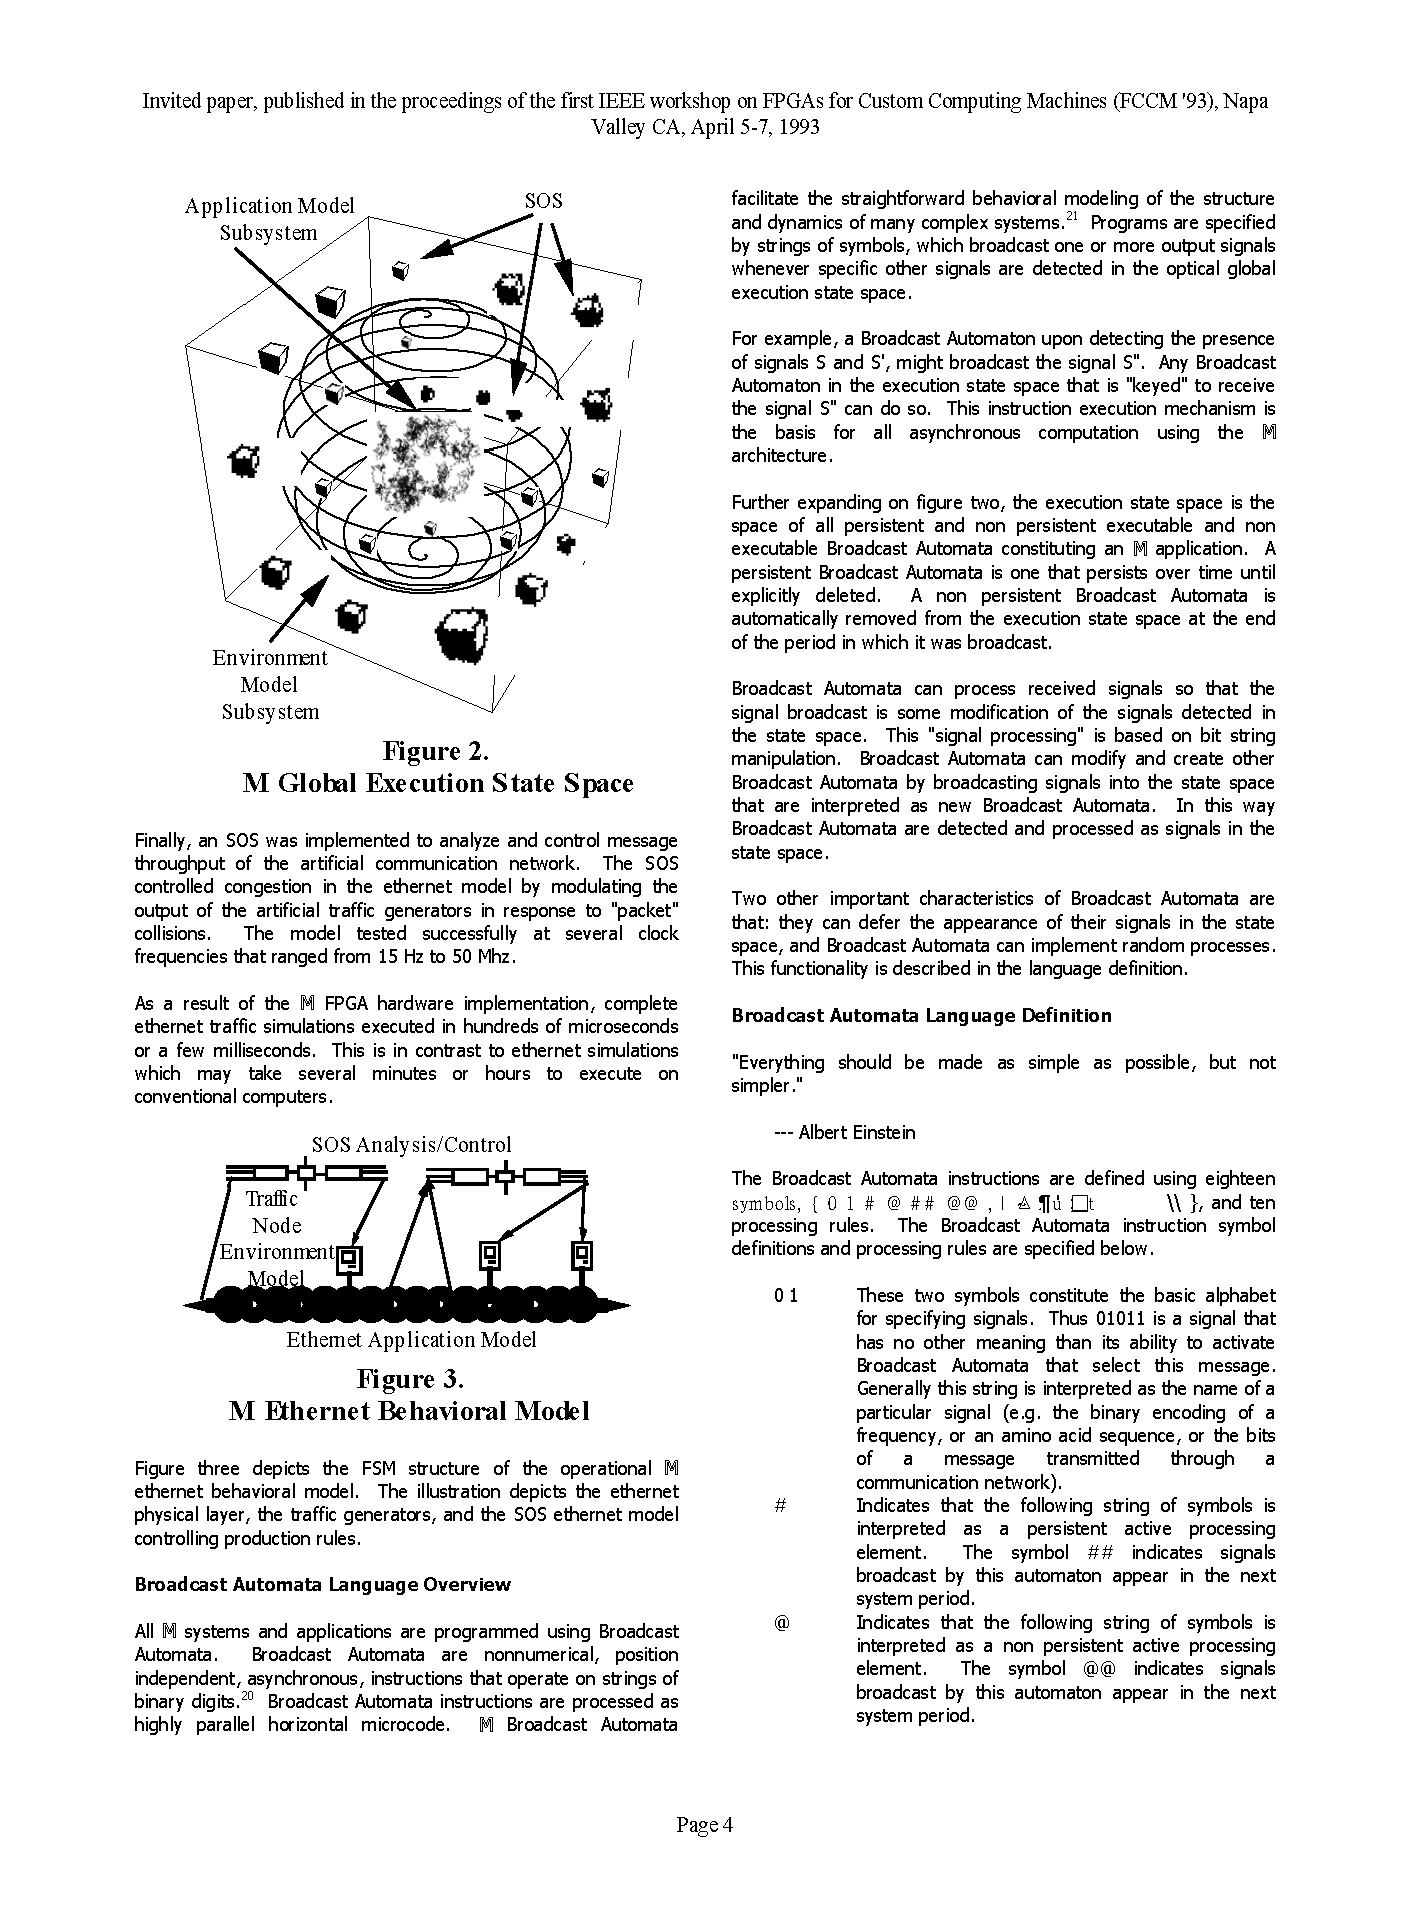 IEEE_FCCMLfw_Page_4.png